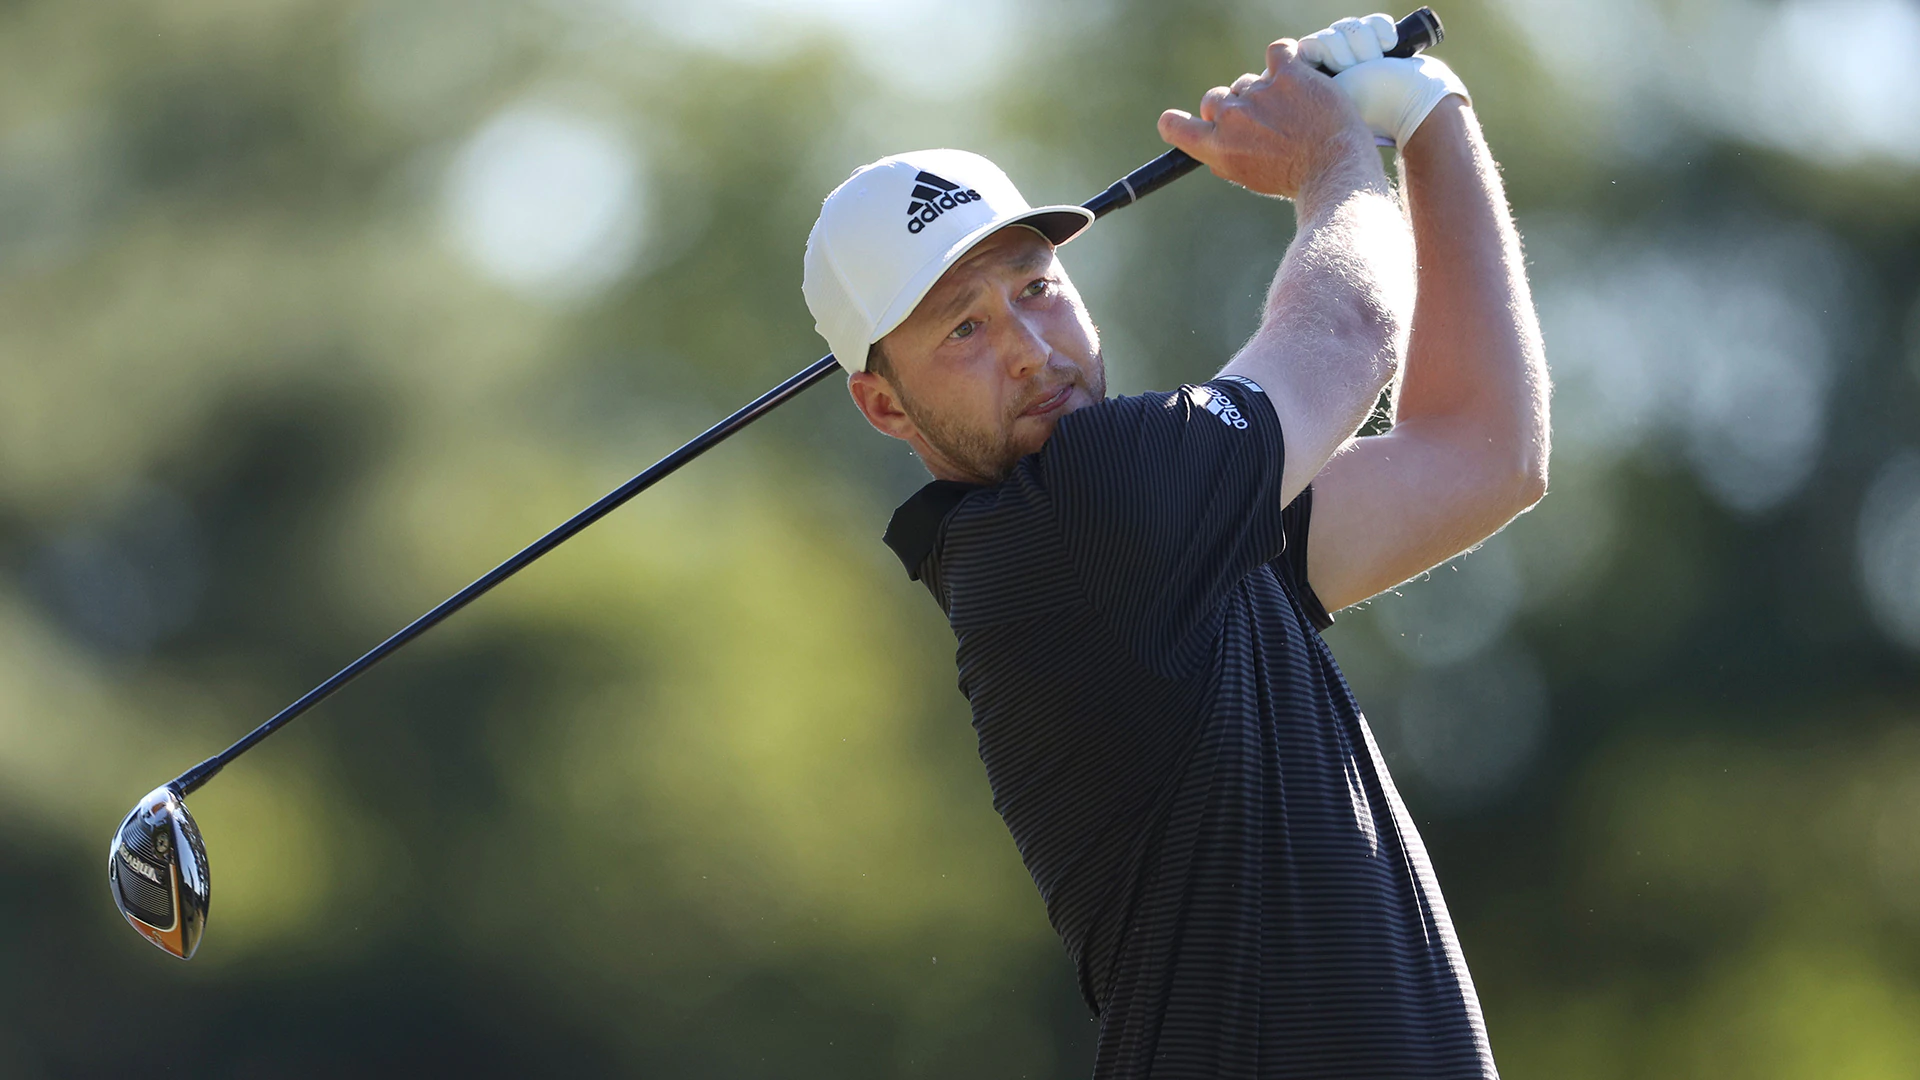 Daniel Berger ‘baffled’ to not be in Masters field after strong post-break play